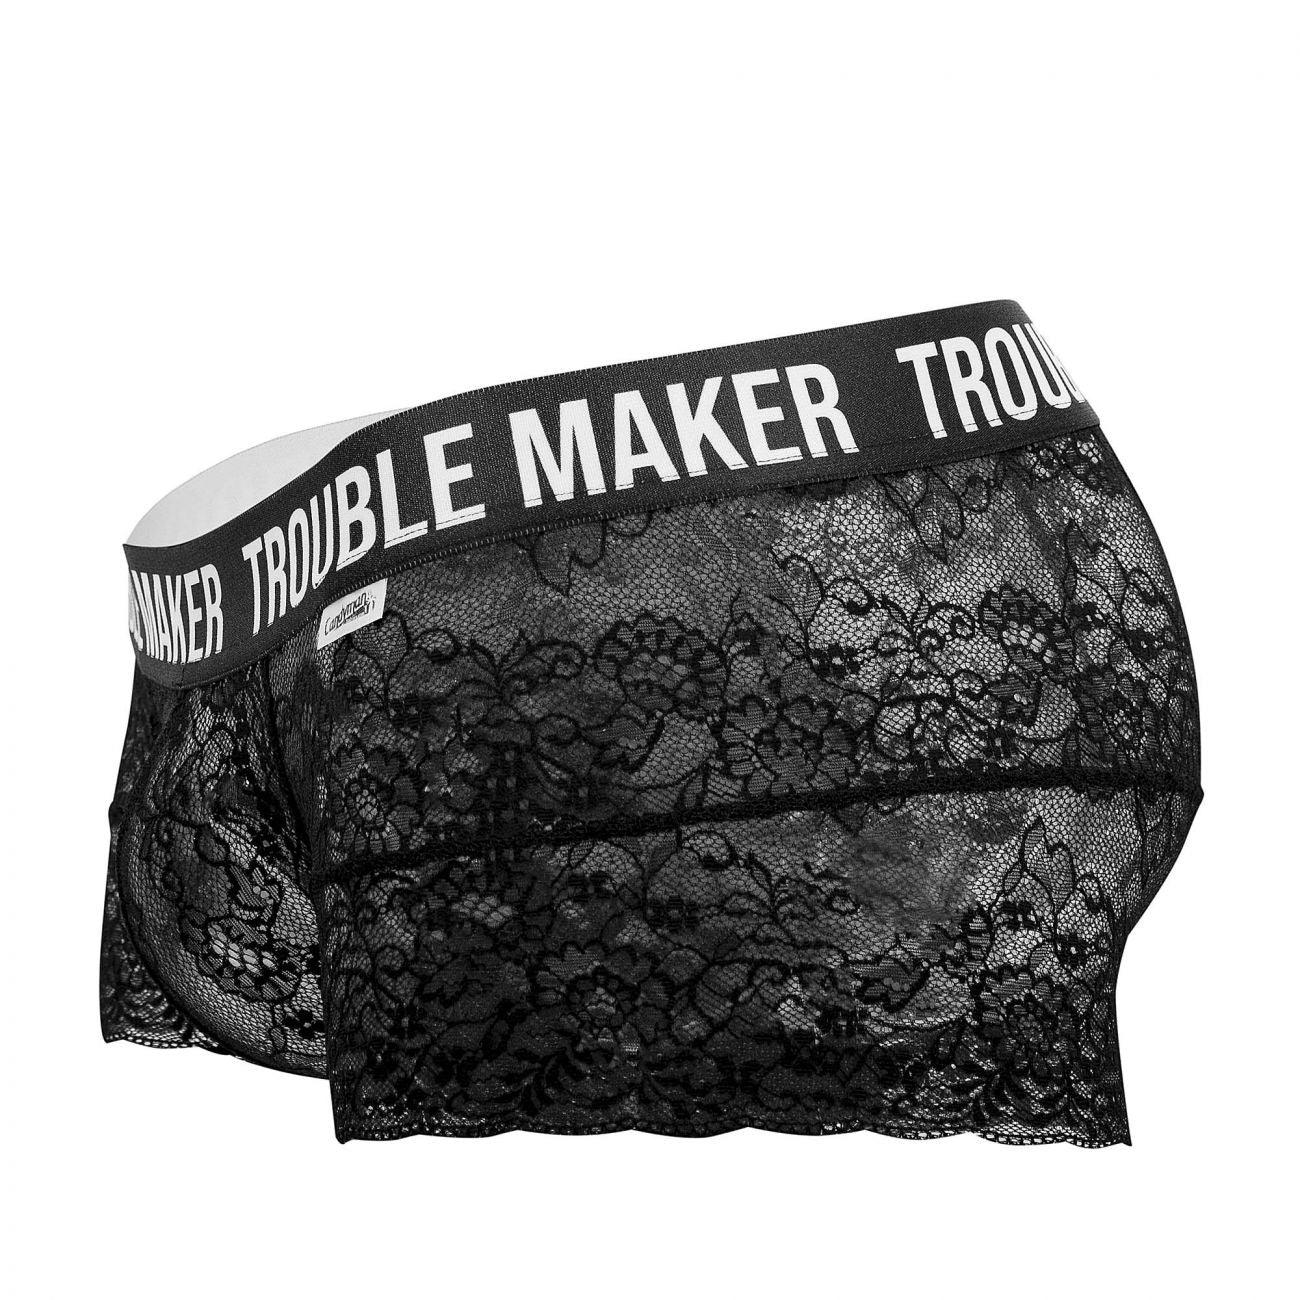 image of product,Trouble Maker Lace Trunks - SEXYEONE